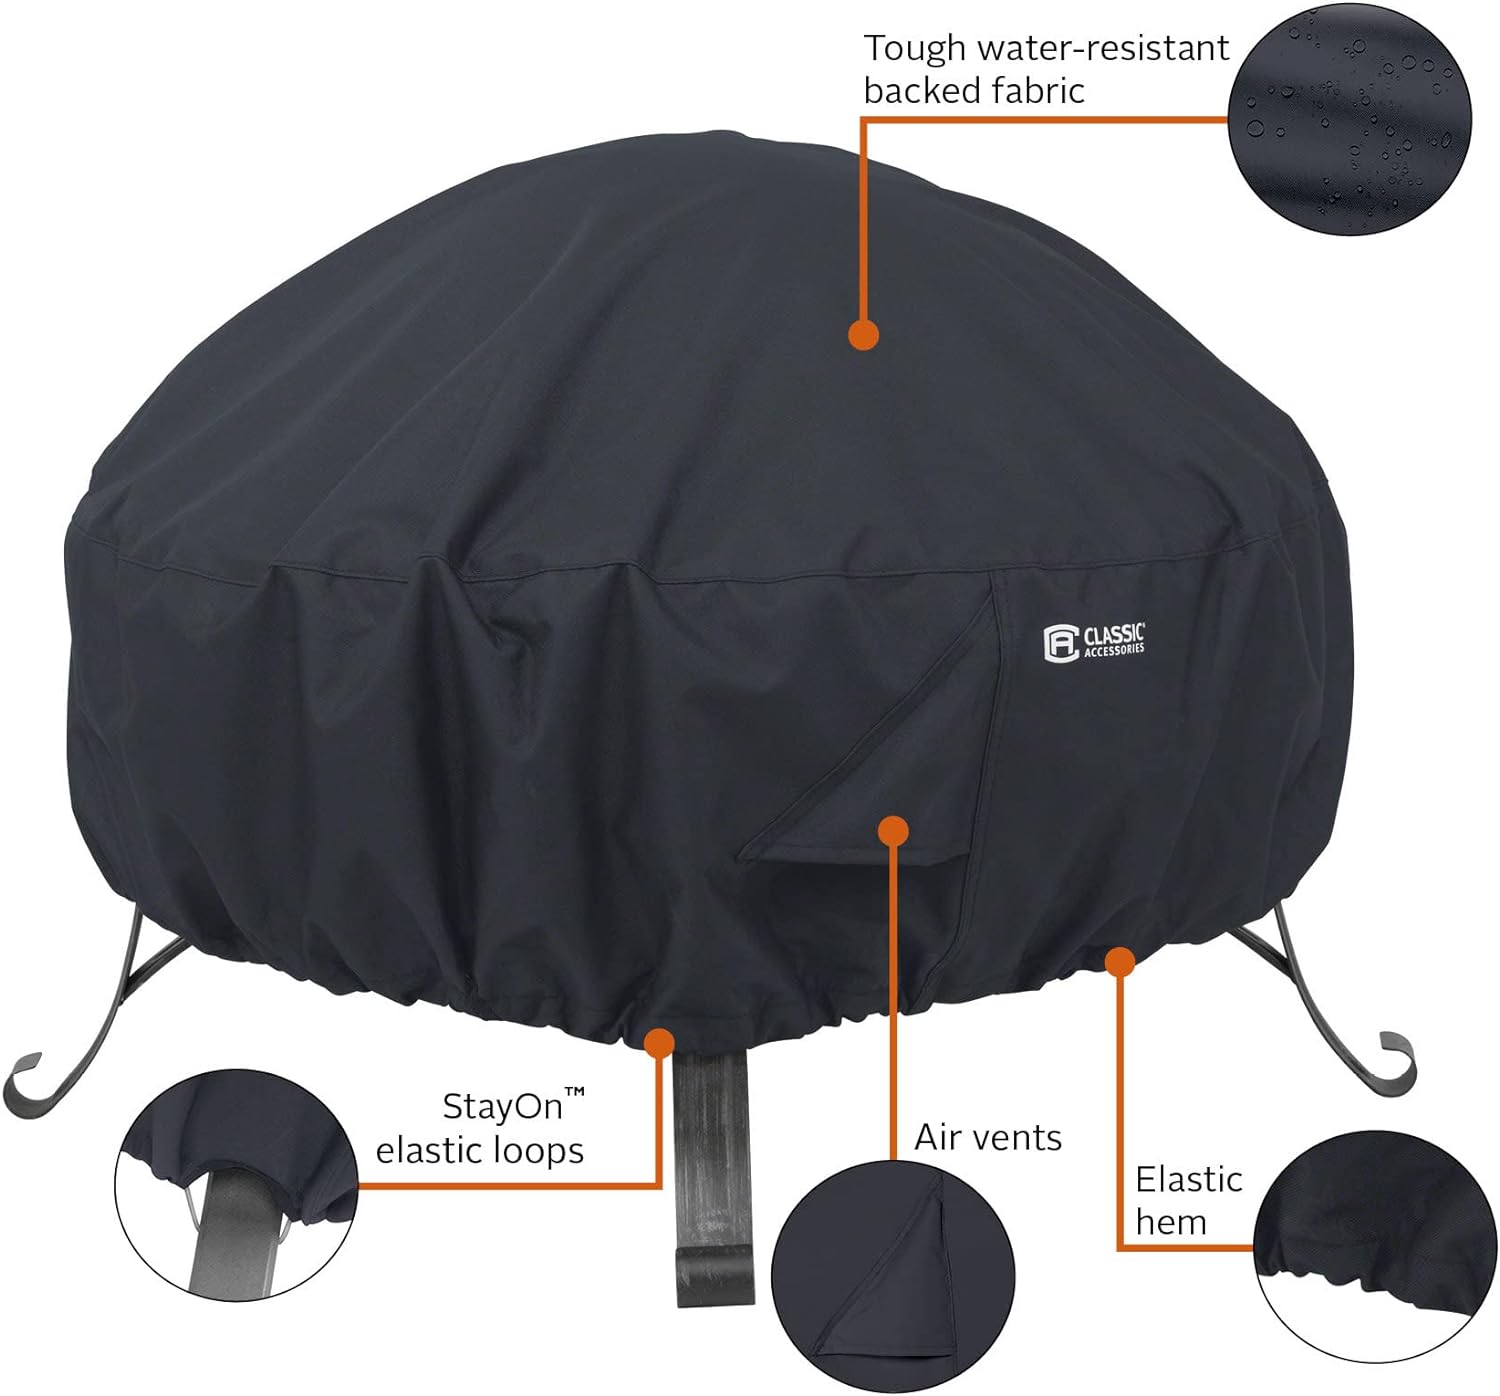 Classic Accessories Water-Resistant Fire Pit Cover Review